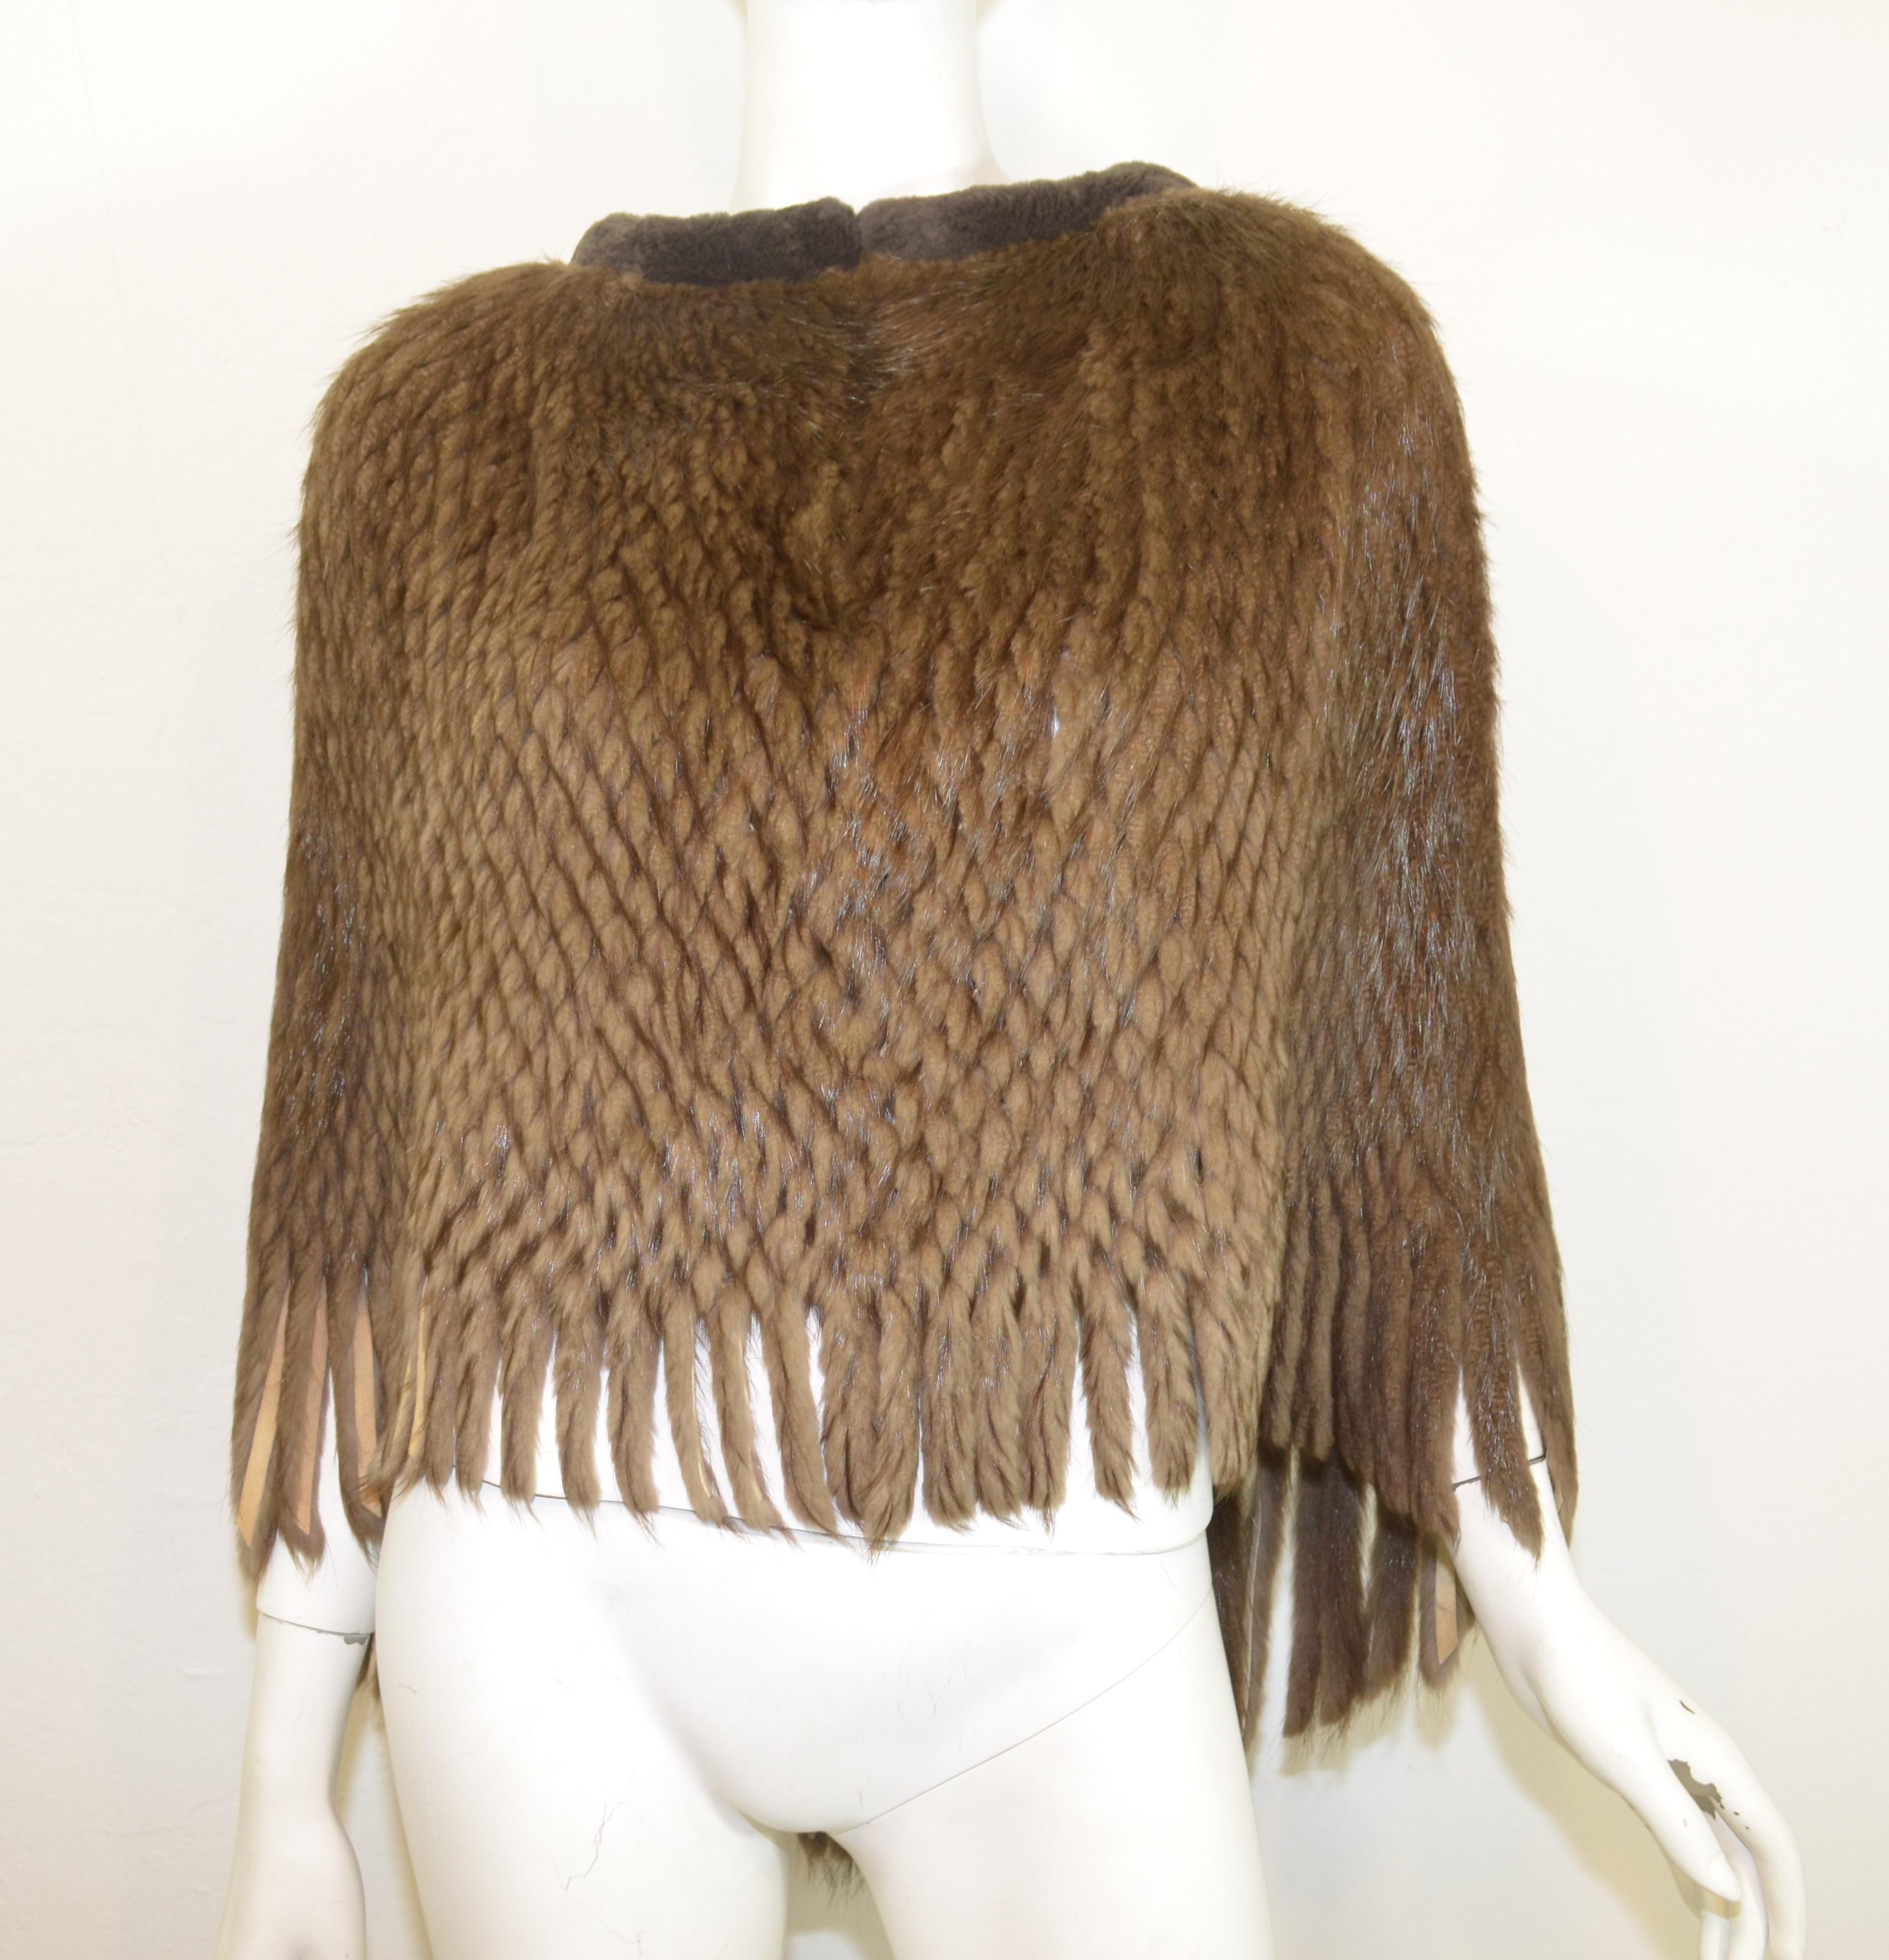 Beaver fur knitted cape features long beaver fur knitted throughout with a sheared mink collar and fringed hem. 

Measurements:
length 27'', opening 54''